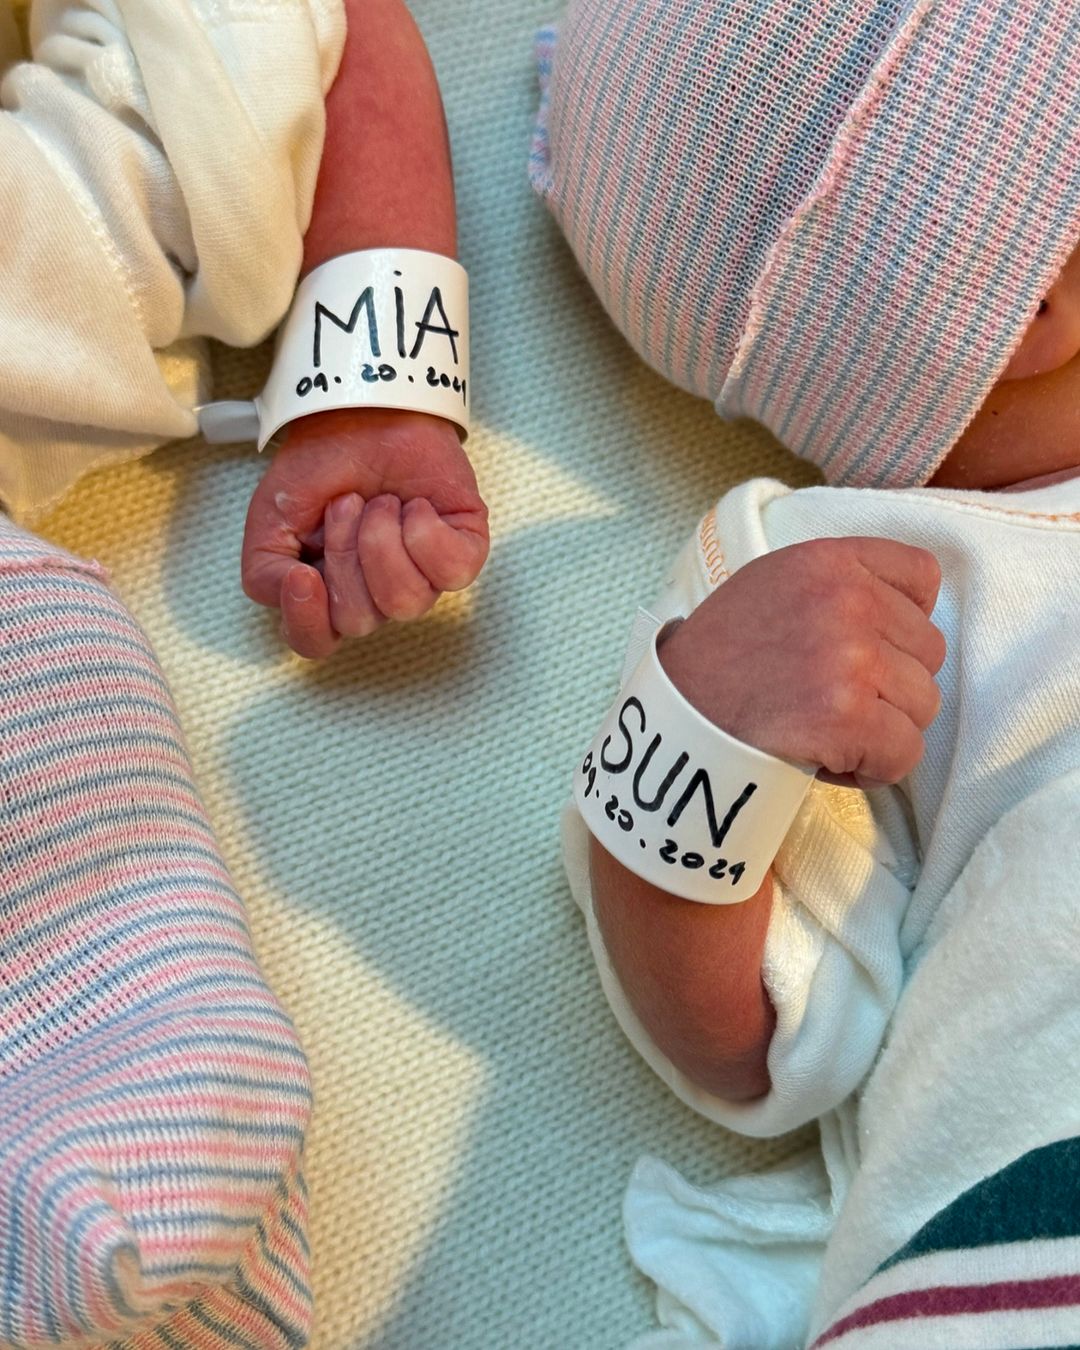 The picture Jacquemus shared on Instagram with the arms of his and his husband's newborn twins, Mia and Sun